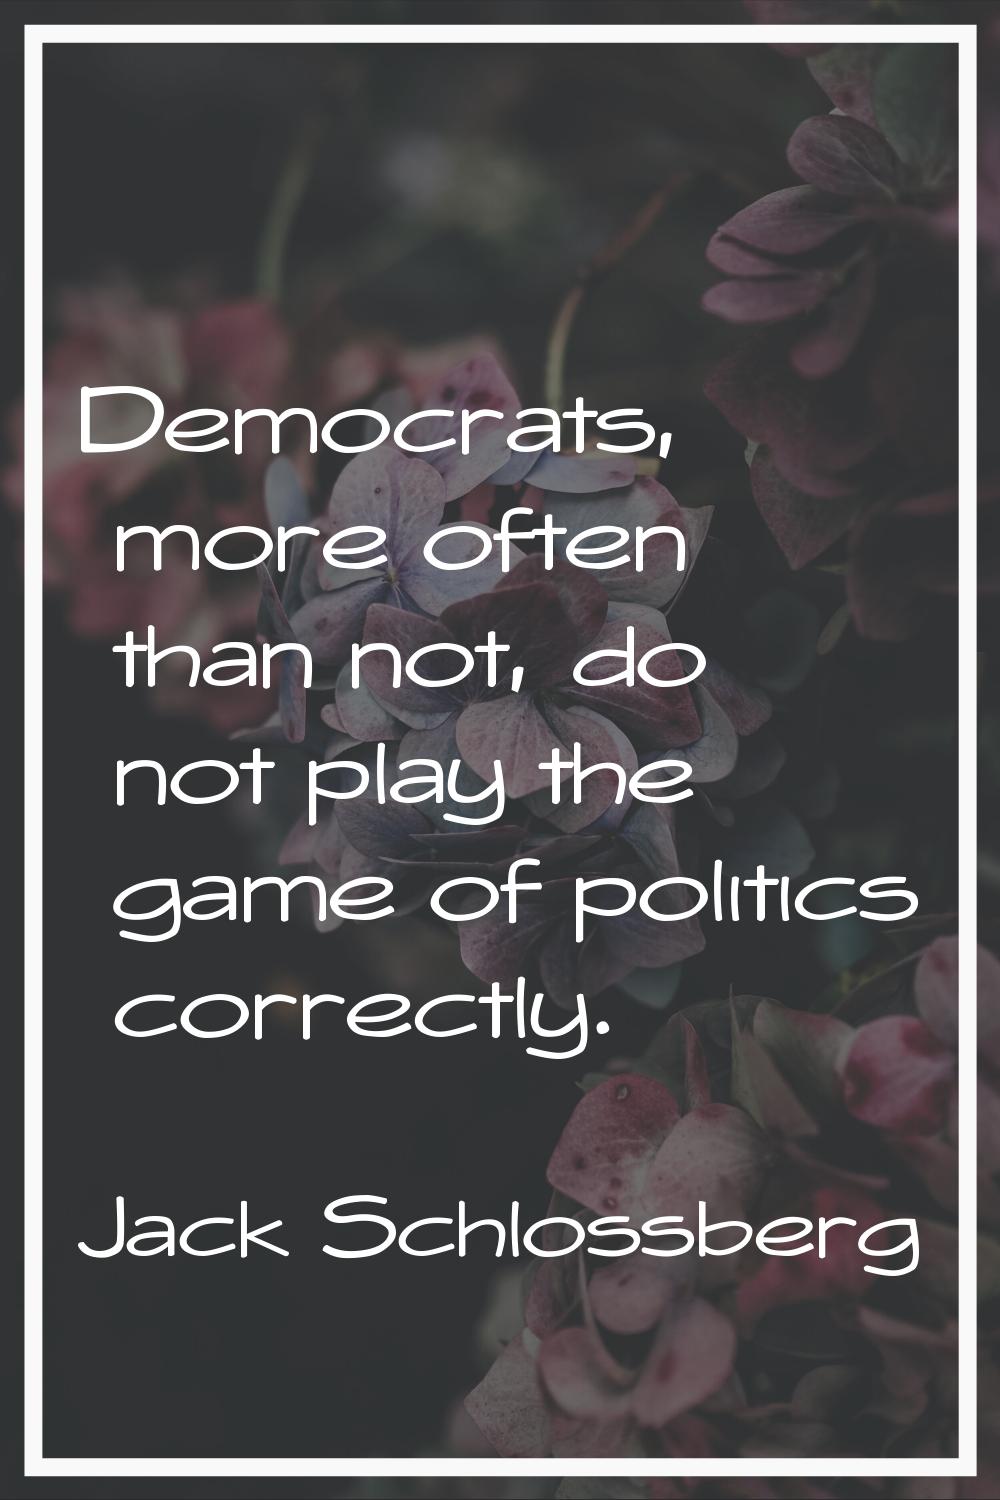 Democrats, more often than not, do not play the game of politics correctly.